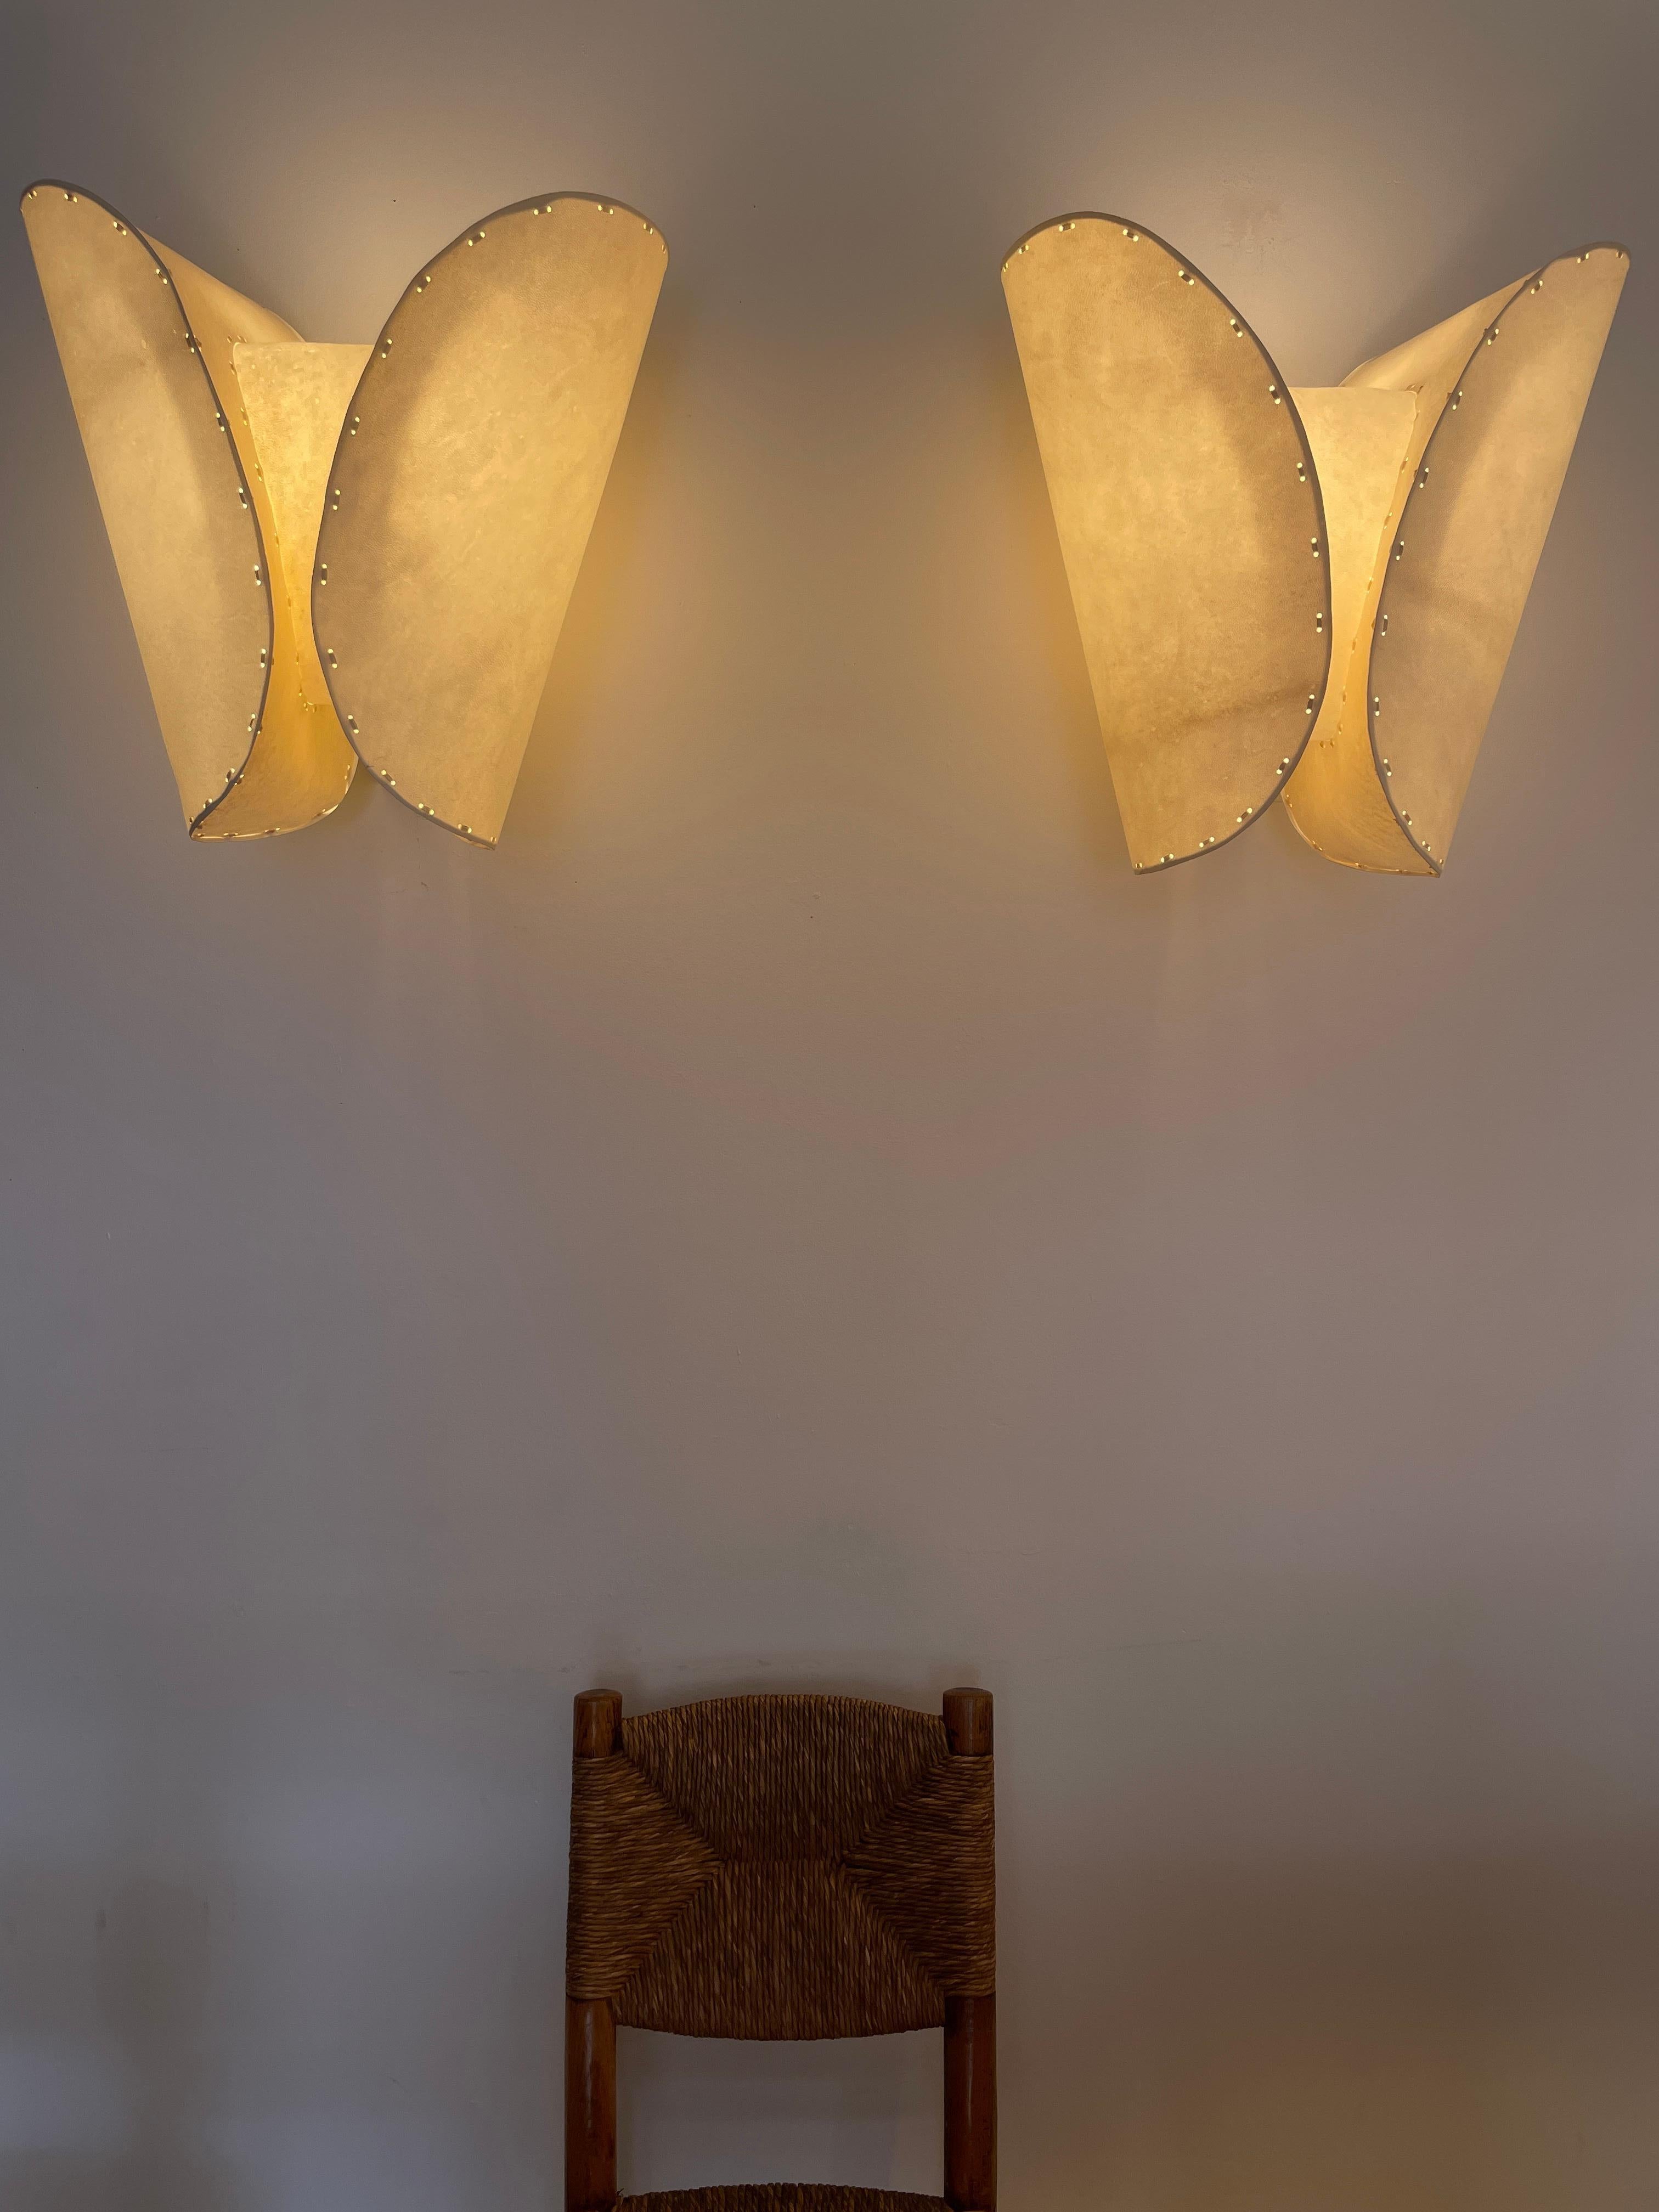 Mauro Fabbro “Gstaad” Wall Lamps Sconce  Alexandre Biaggi  Botega Volta. Signed  For Sale 3